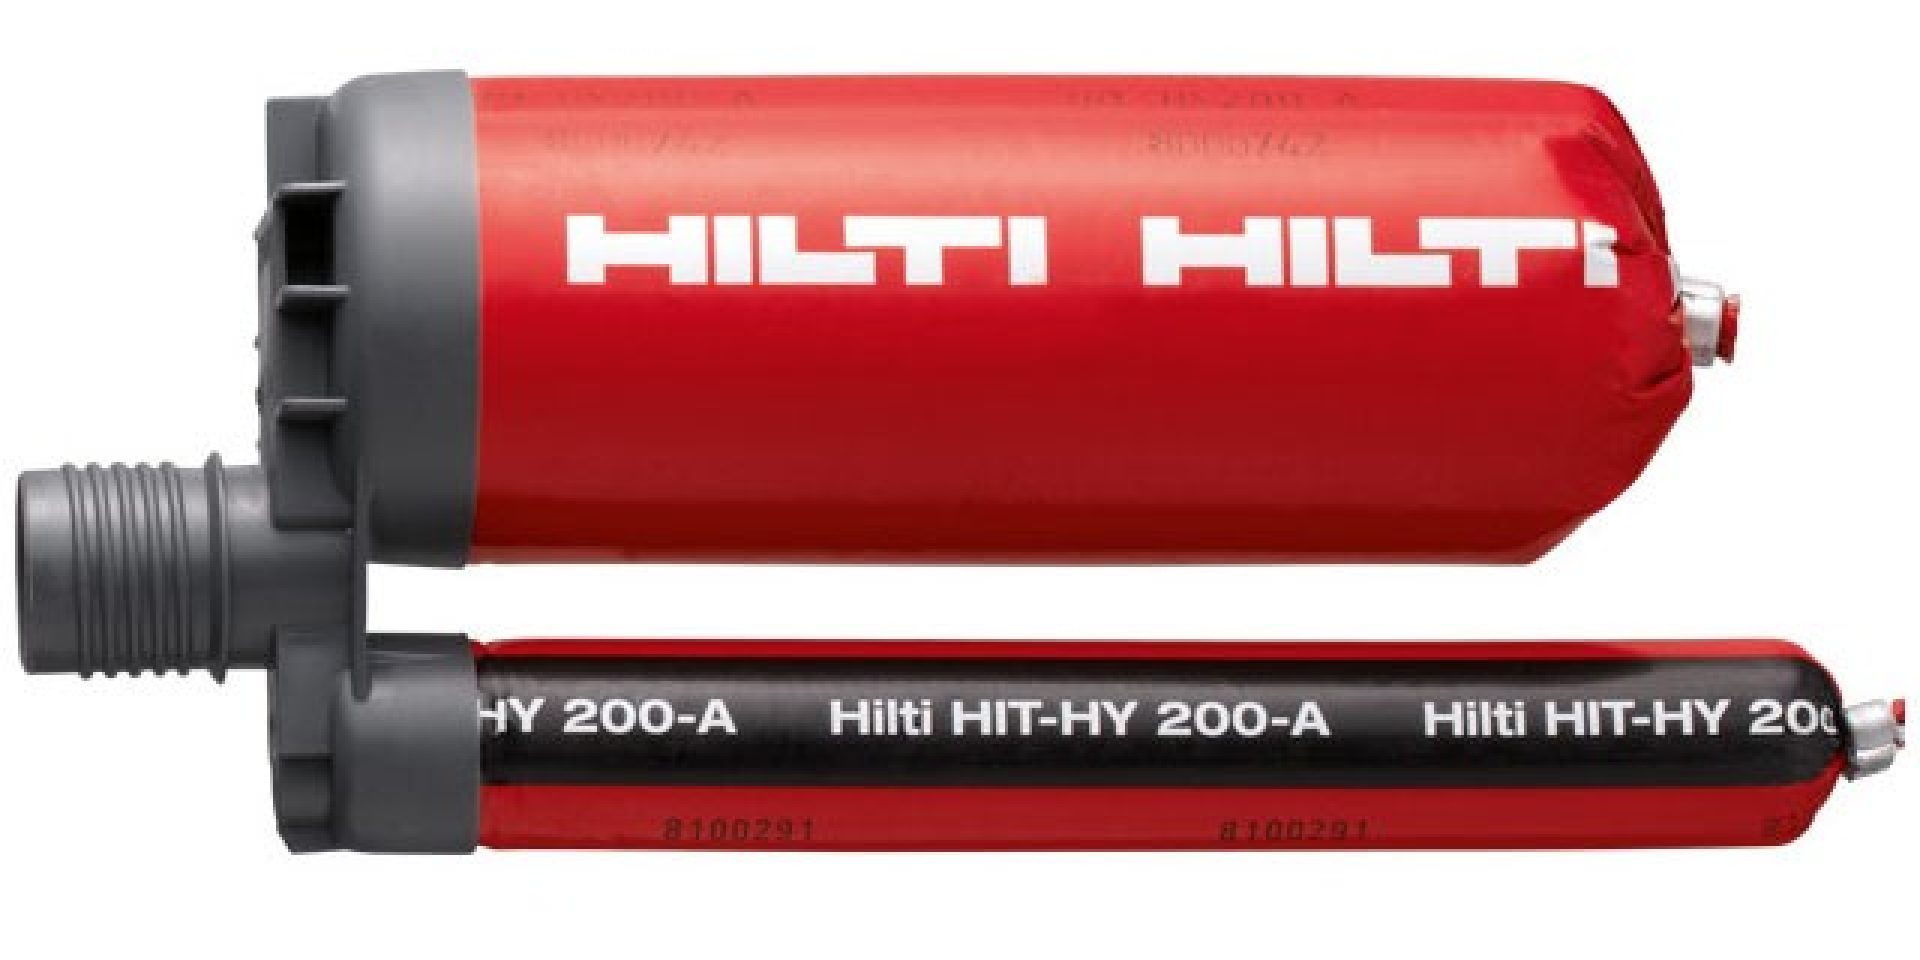 HIT-HY 200-A ultimate-performance hybrid mortar for heavy anchoring and rebar connections as part of the Hilti SafeSet system